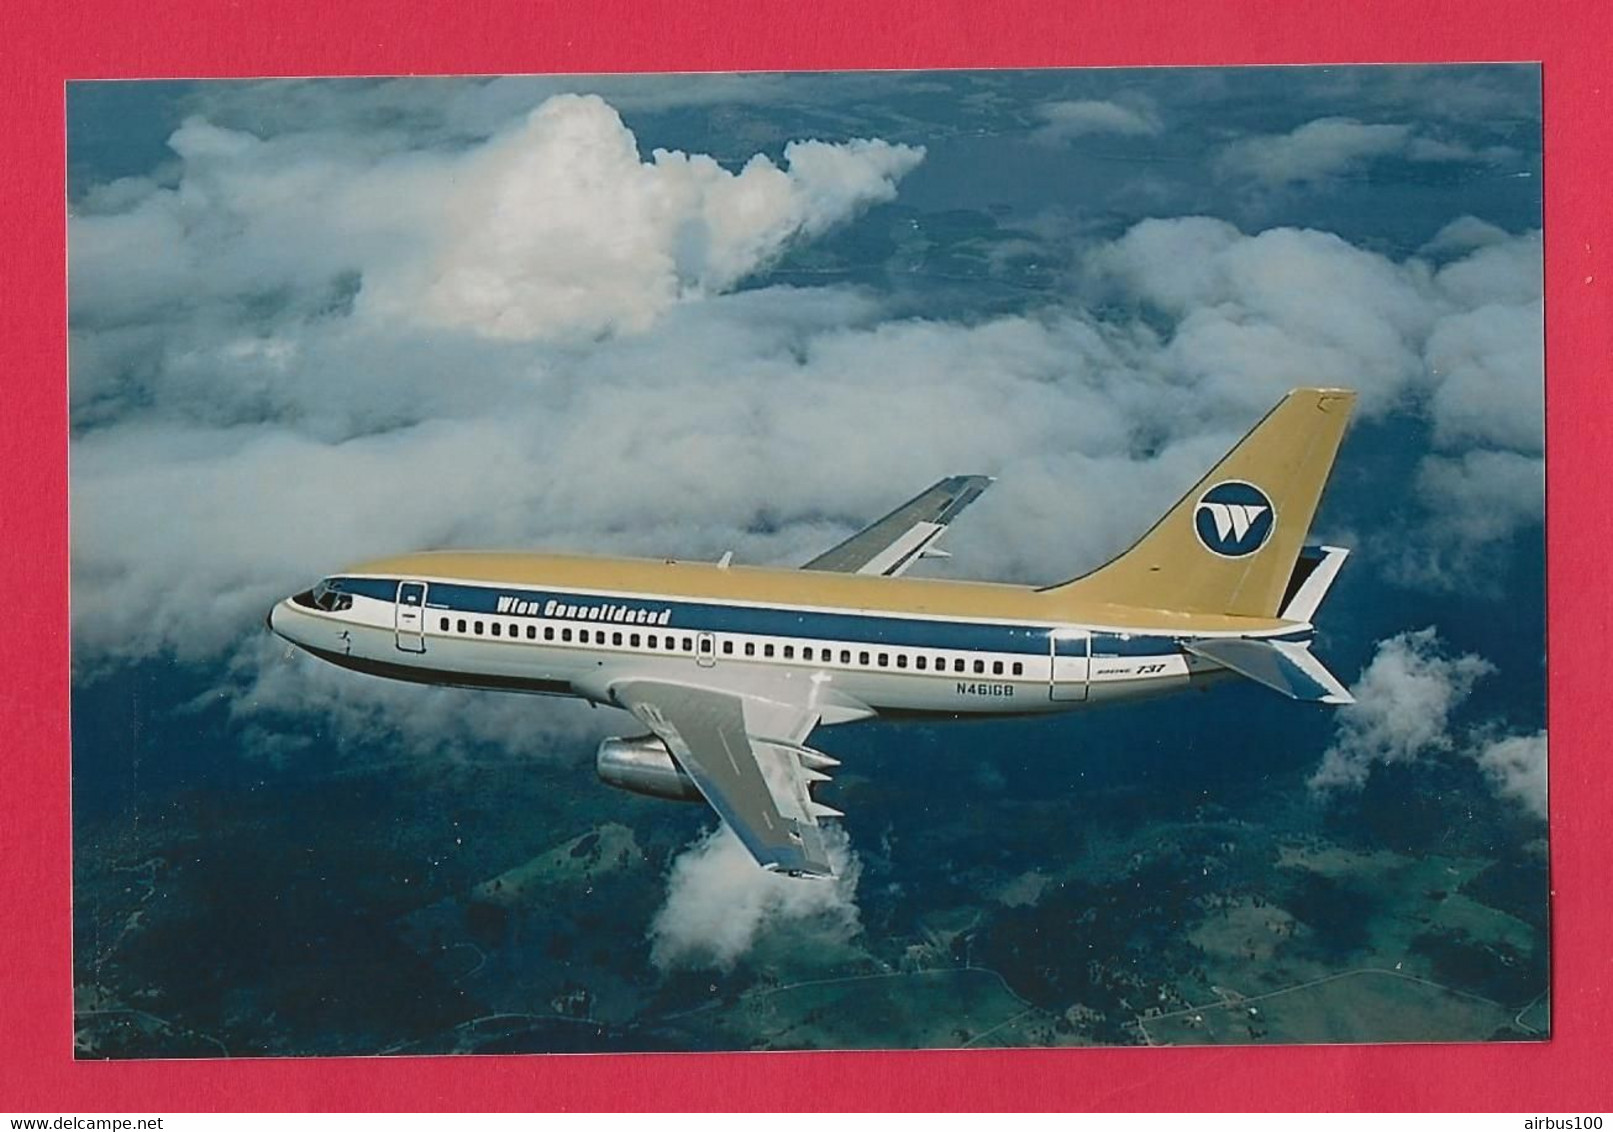 BELLE PHOTO REPRODUCTION AVION PLANE FLUGZEUG - BOEING 737 WIEN CONSOLIDATED - Aviazione